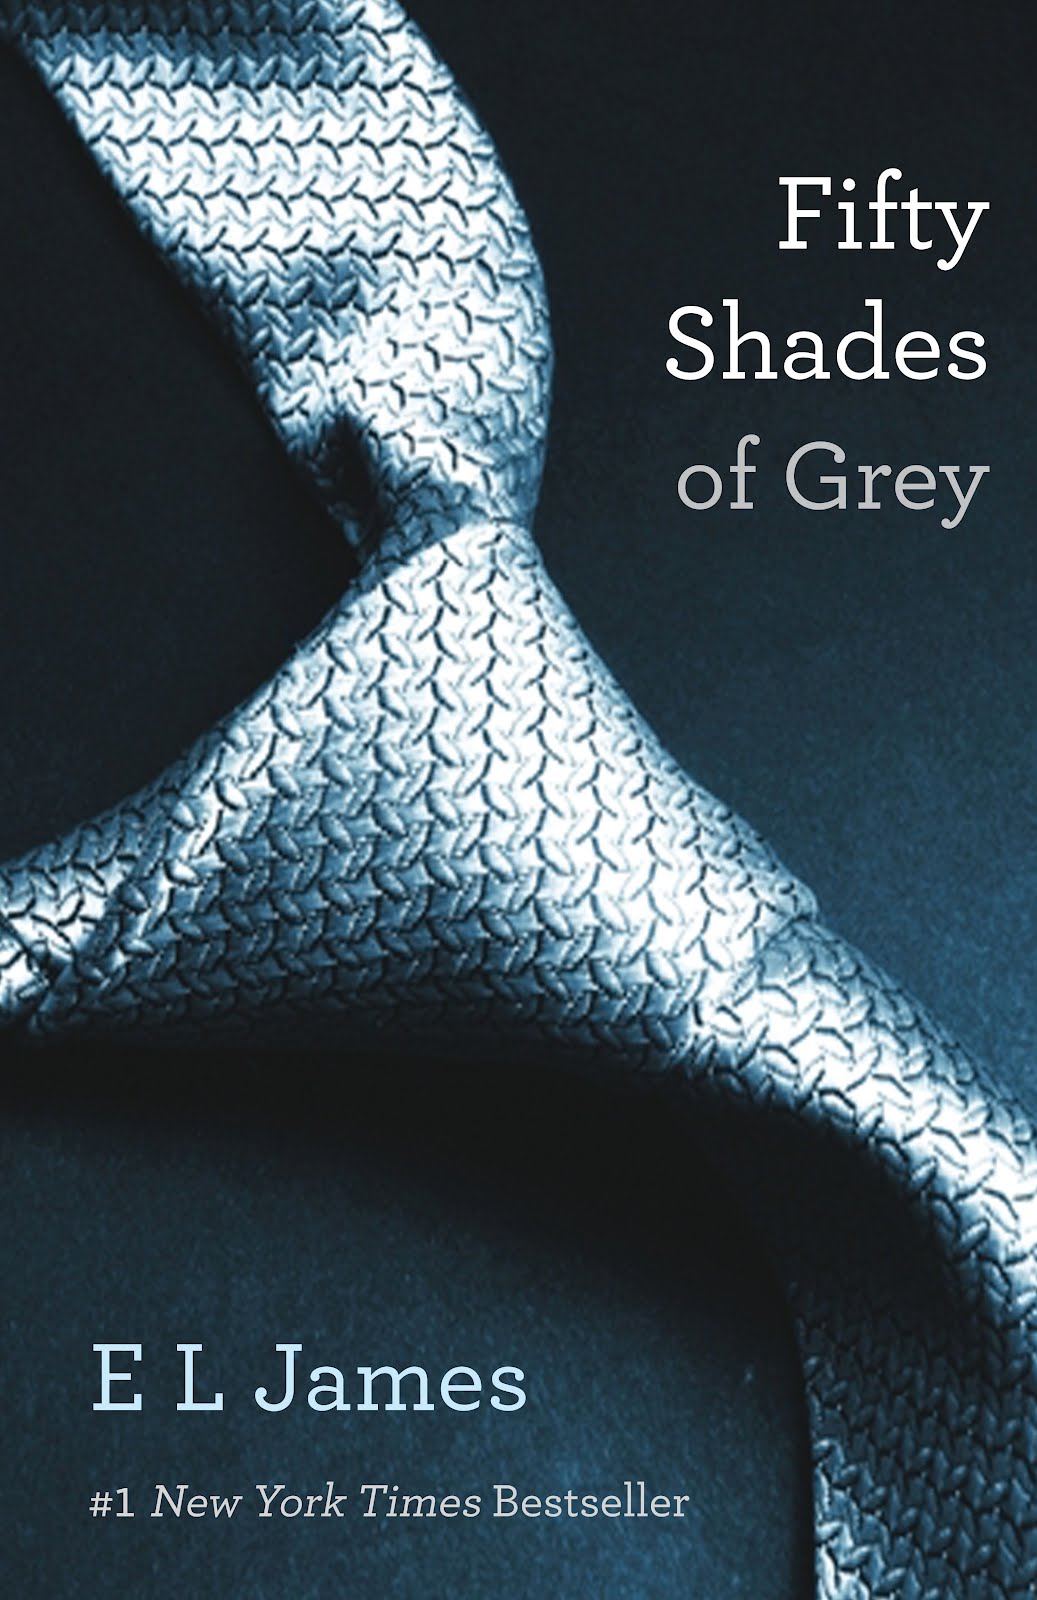 Books 4 you Grey Fifty Shades of Grey by E L James full book download